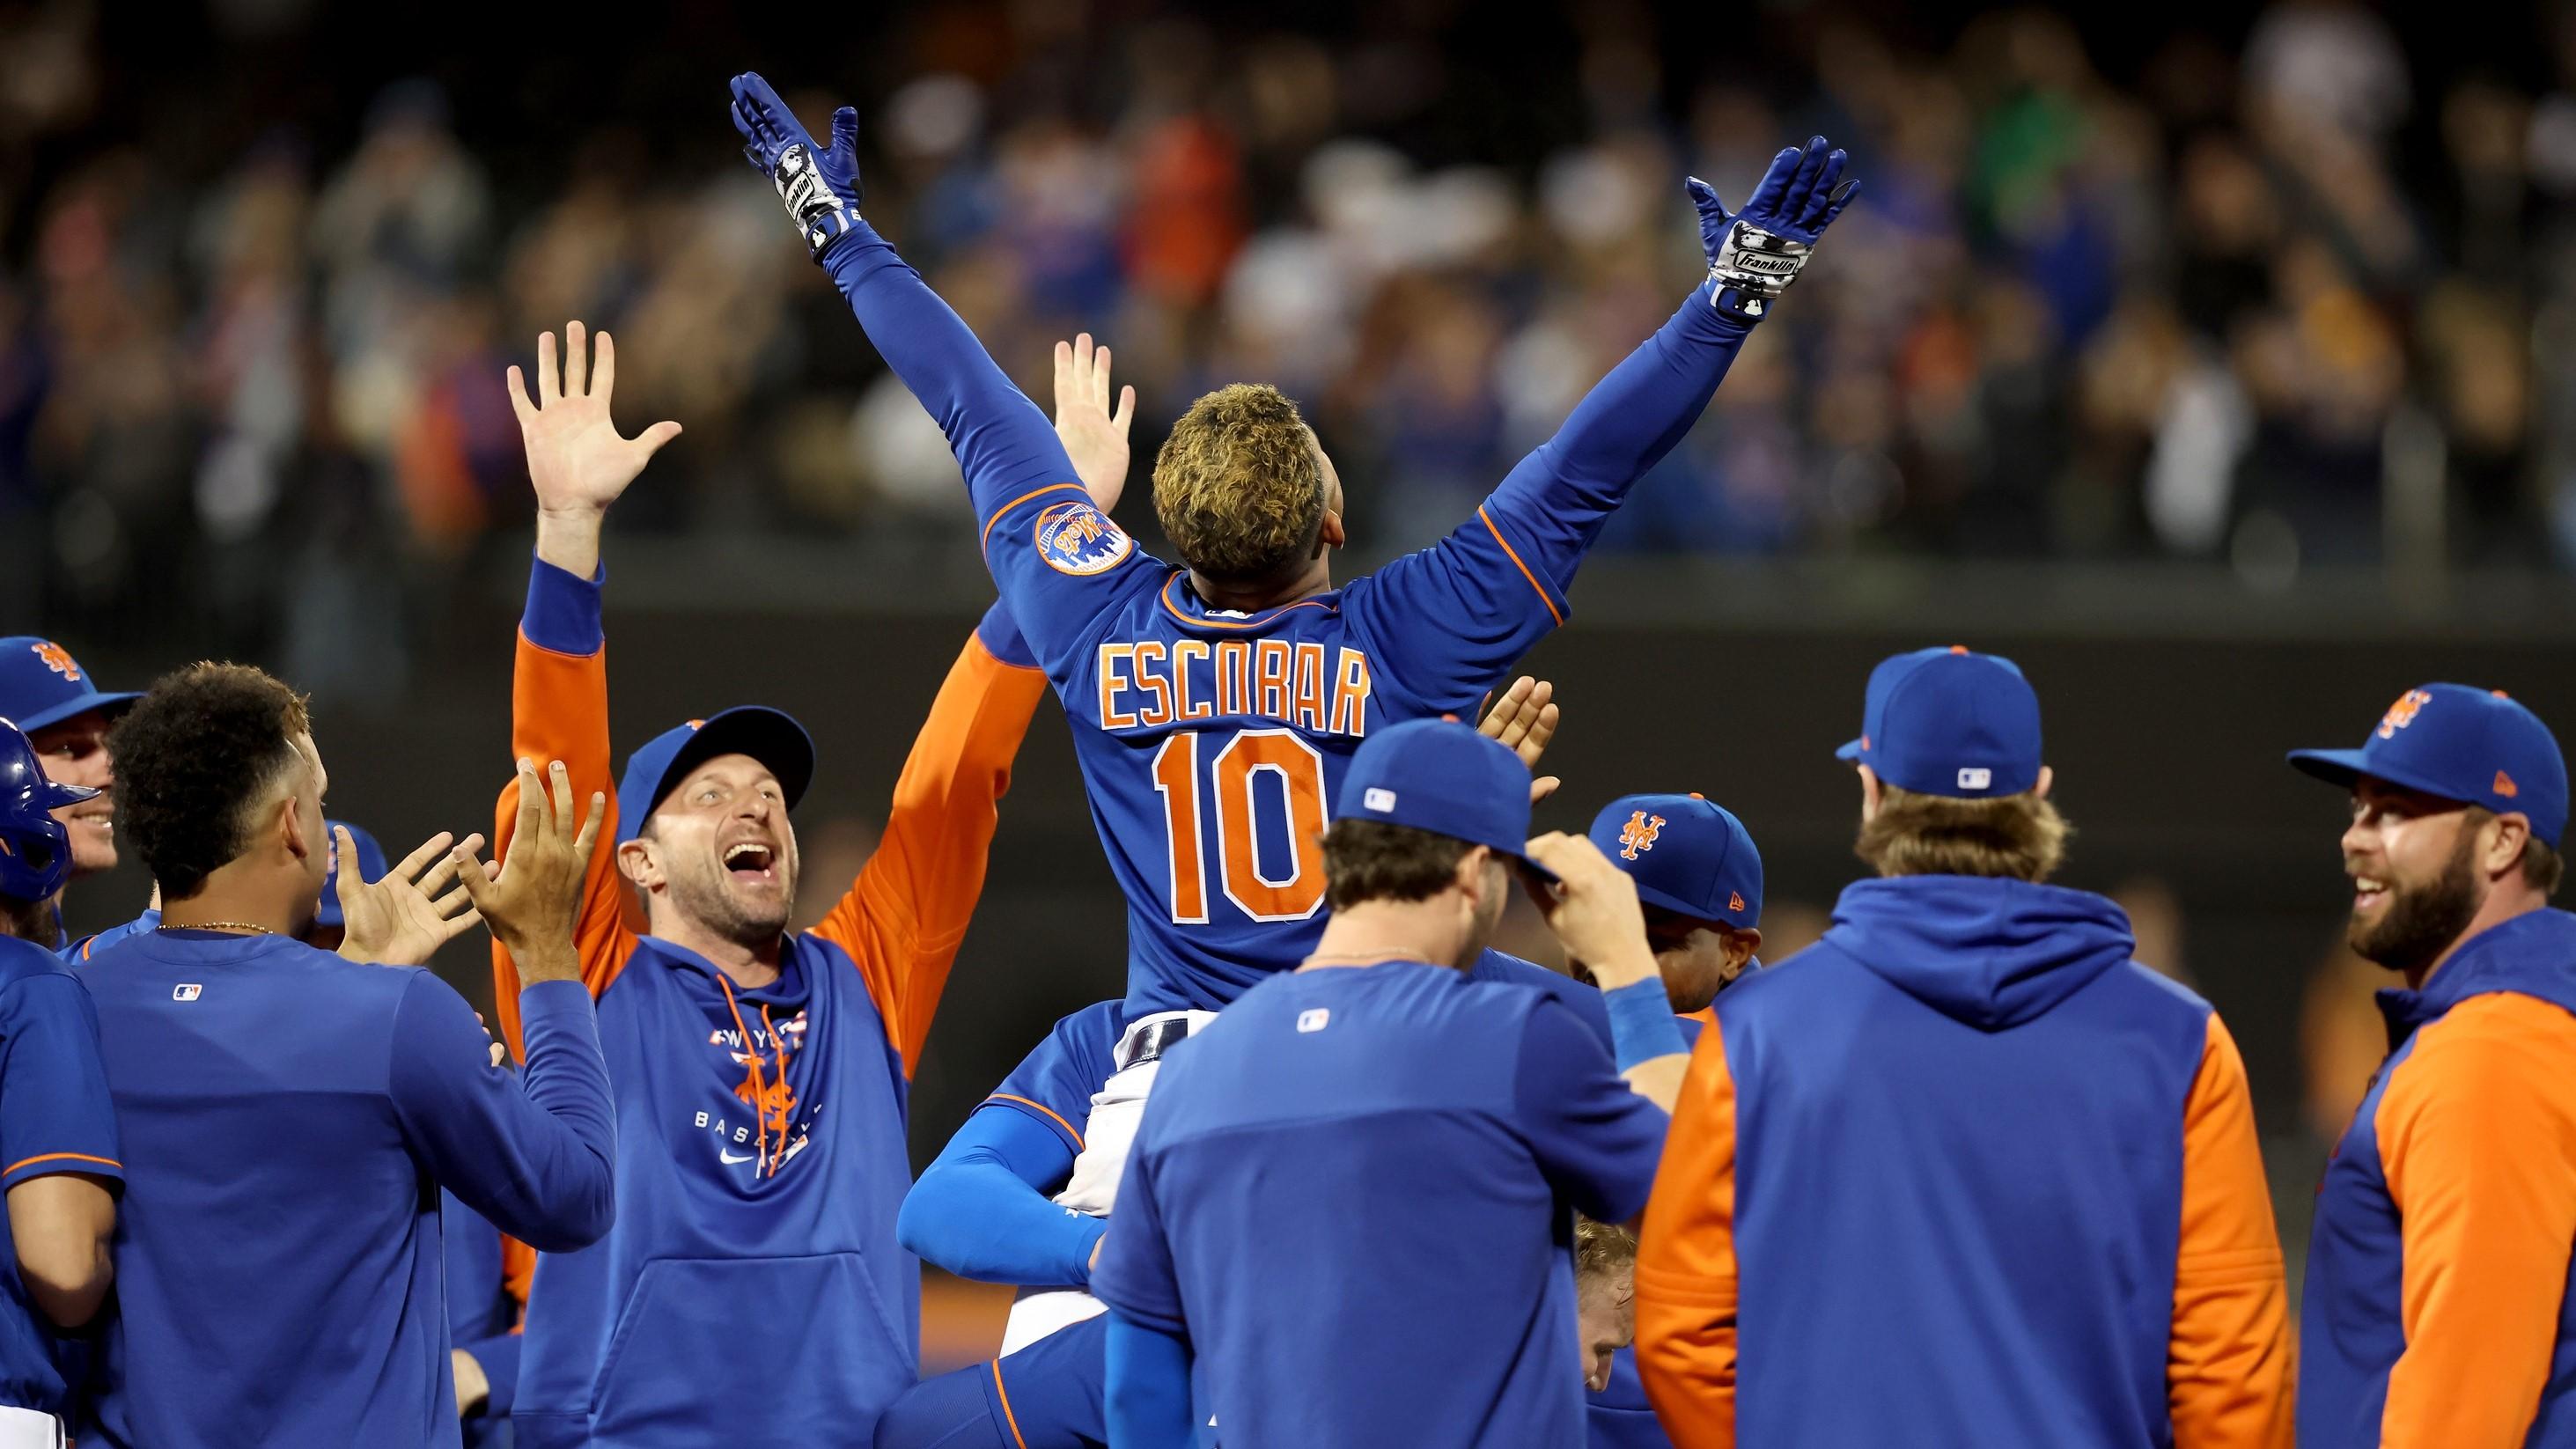 Sep 28, 2022; New York City, New York, USA; New York Mets third baseman Eduardo Escobar (10) celebrates his tenth inning game winning walkoff single against the Miami Marlins with teammates at Citi Field. / Brad Penner-USA TODAY Sports